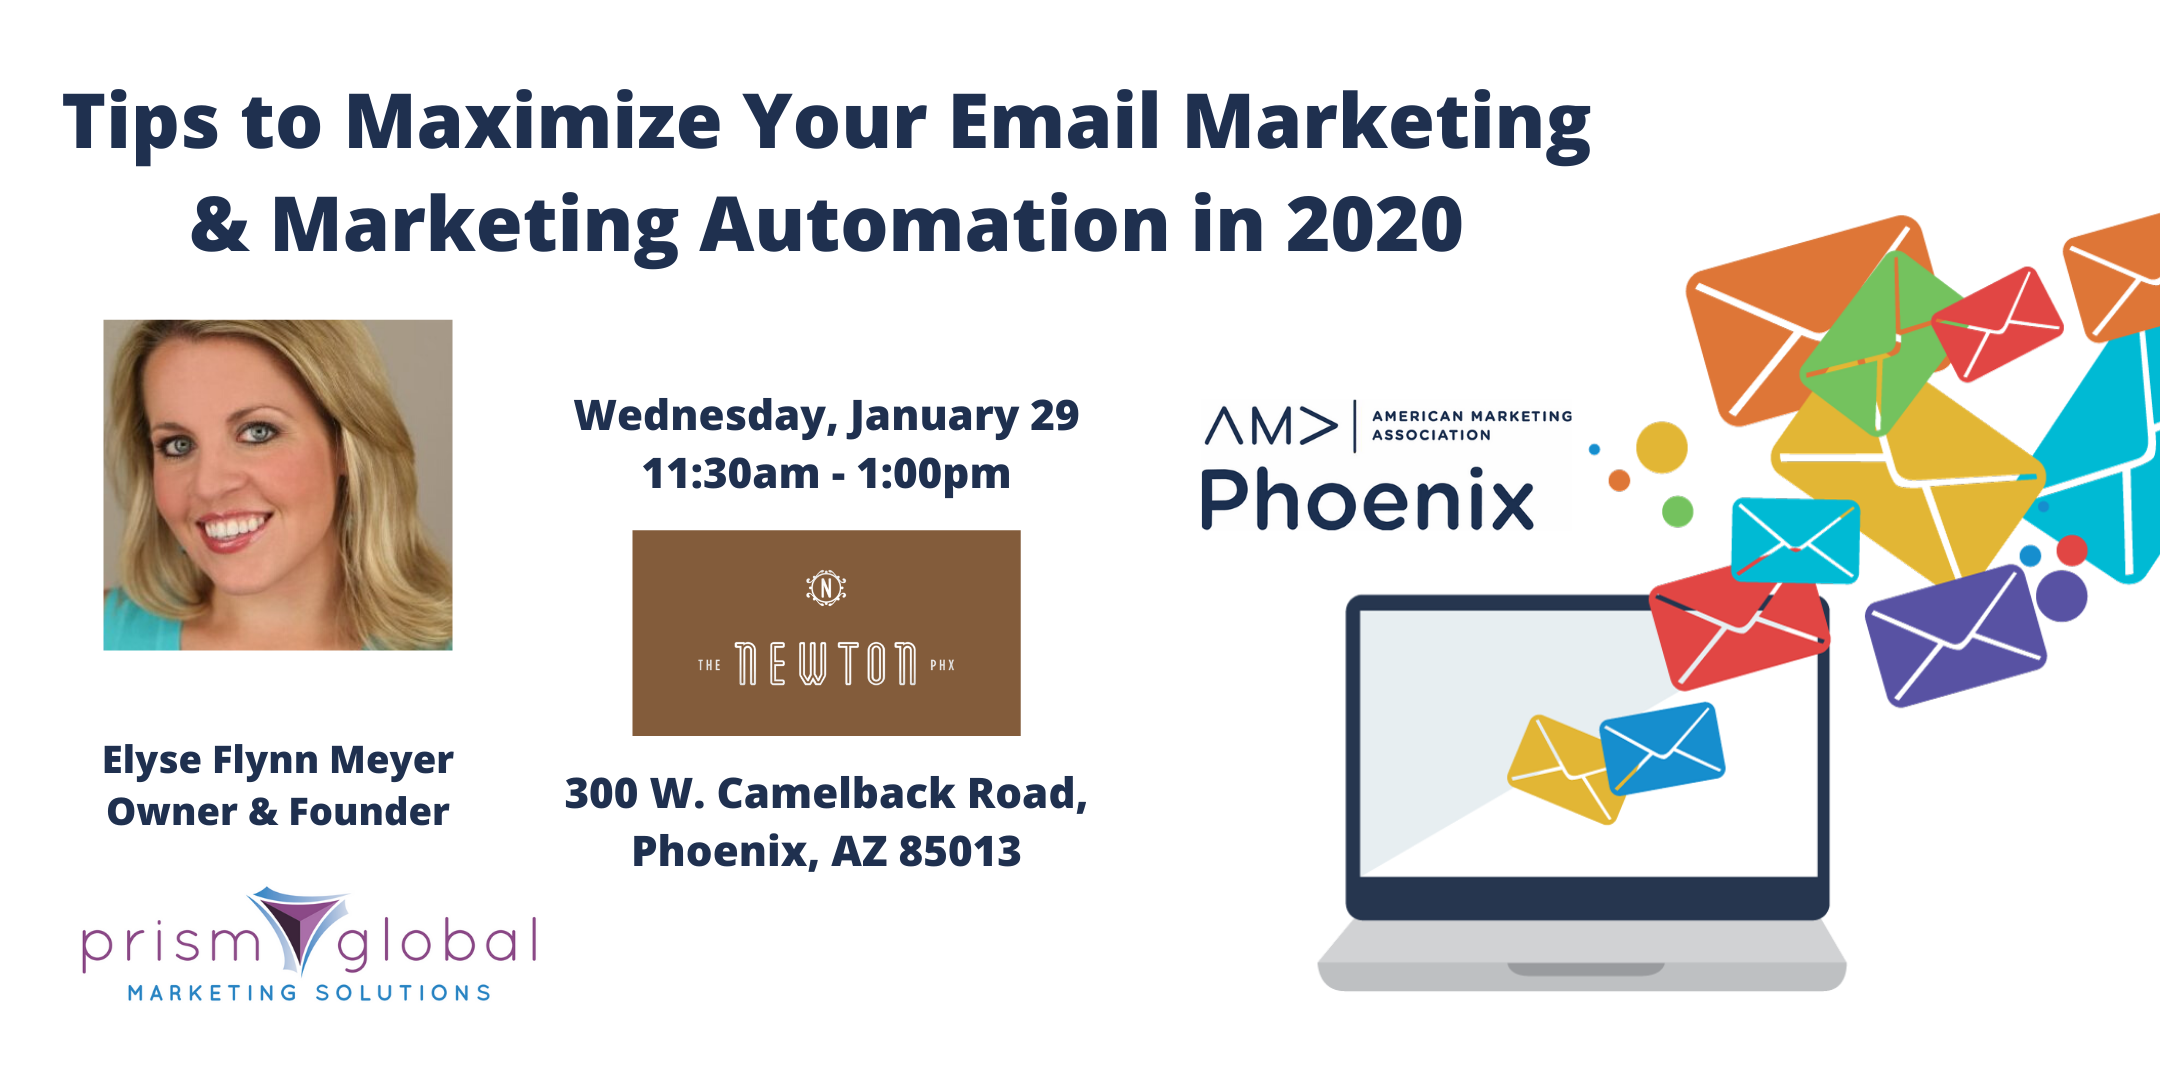 Tips to Maximize Your Email Marketing & Marketing Automation in 2020